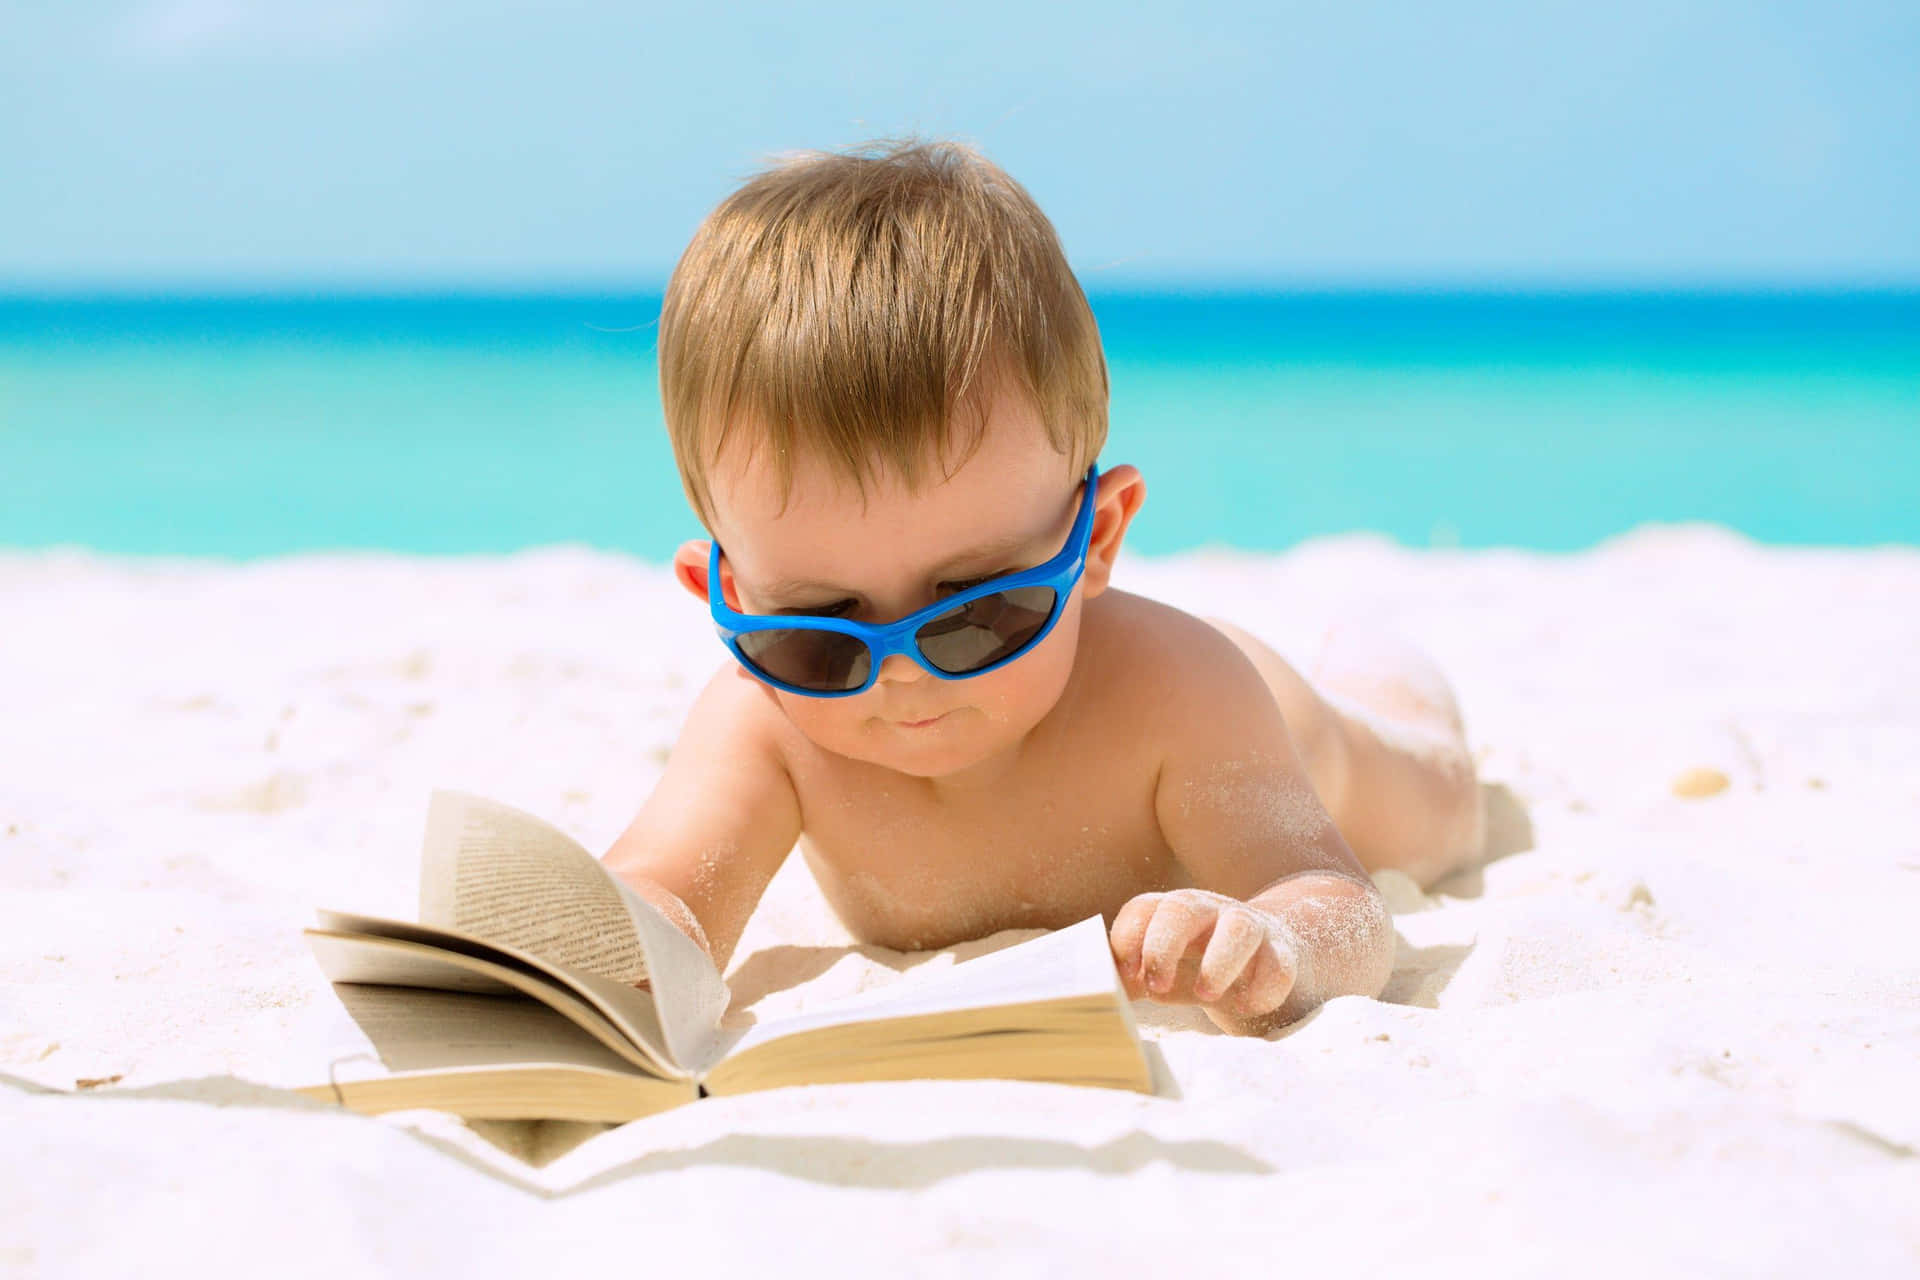 A Baby Wearing Sunglasses And Reading A Book On The Beach